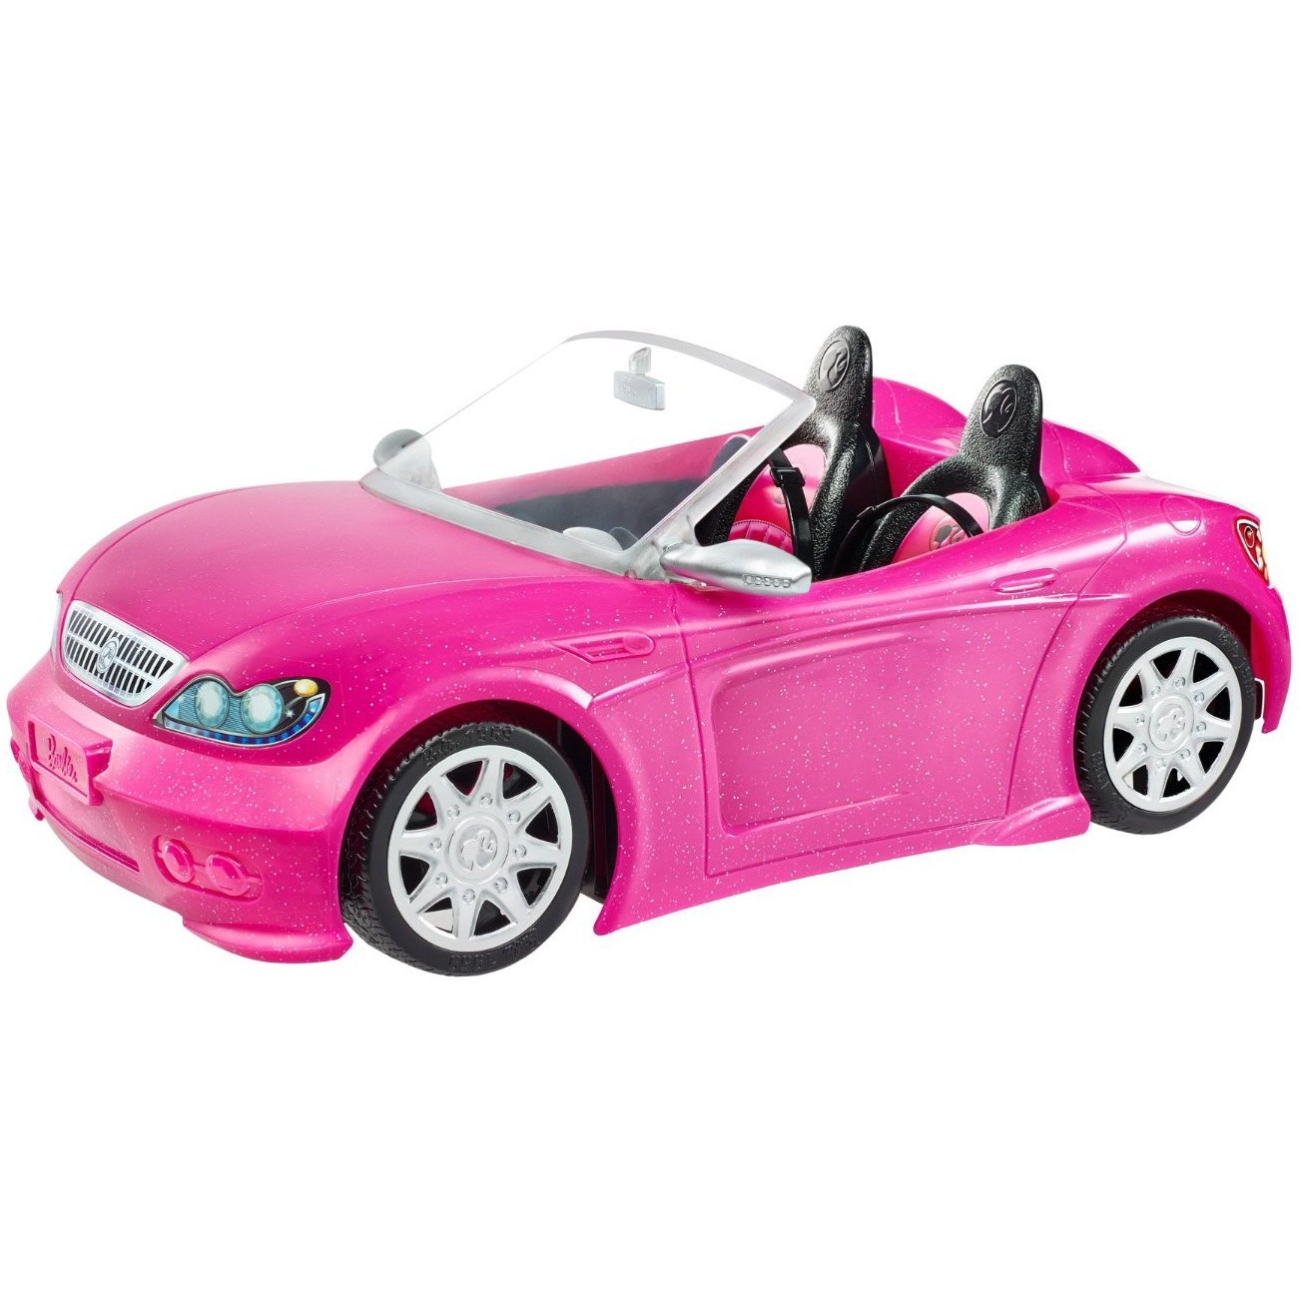 Barbie Glam Convertible, Pink - image 1 of 9